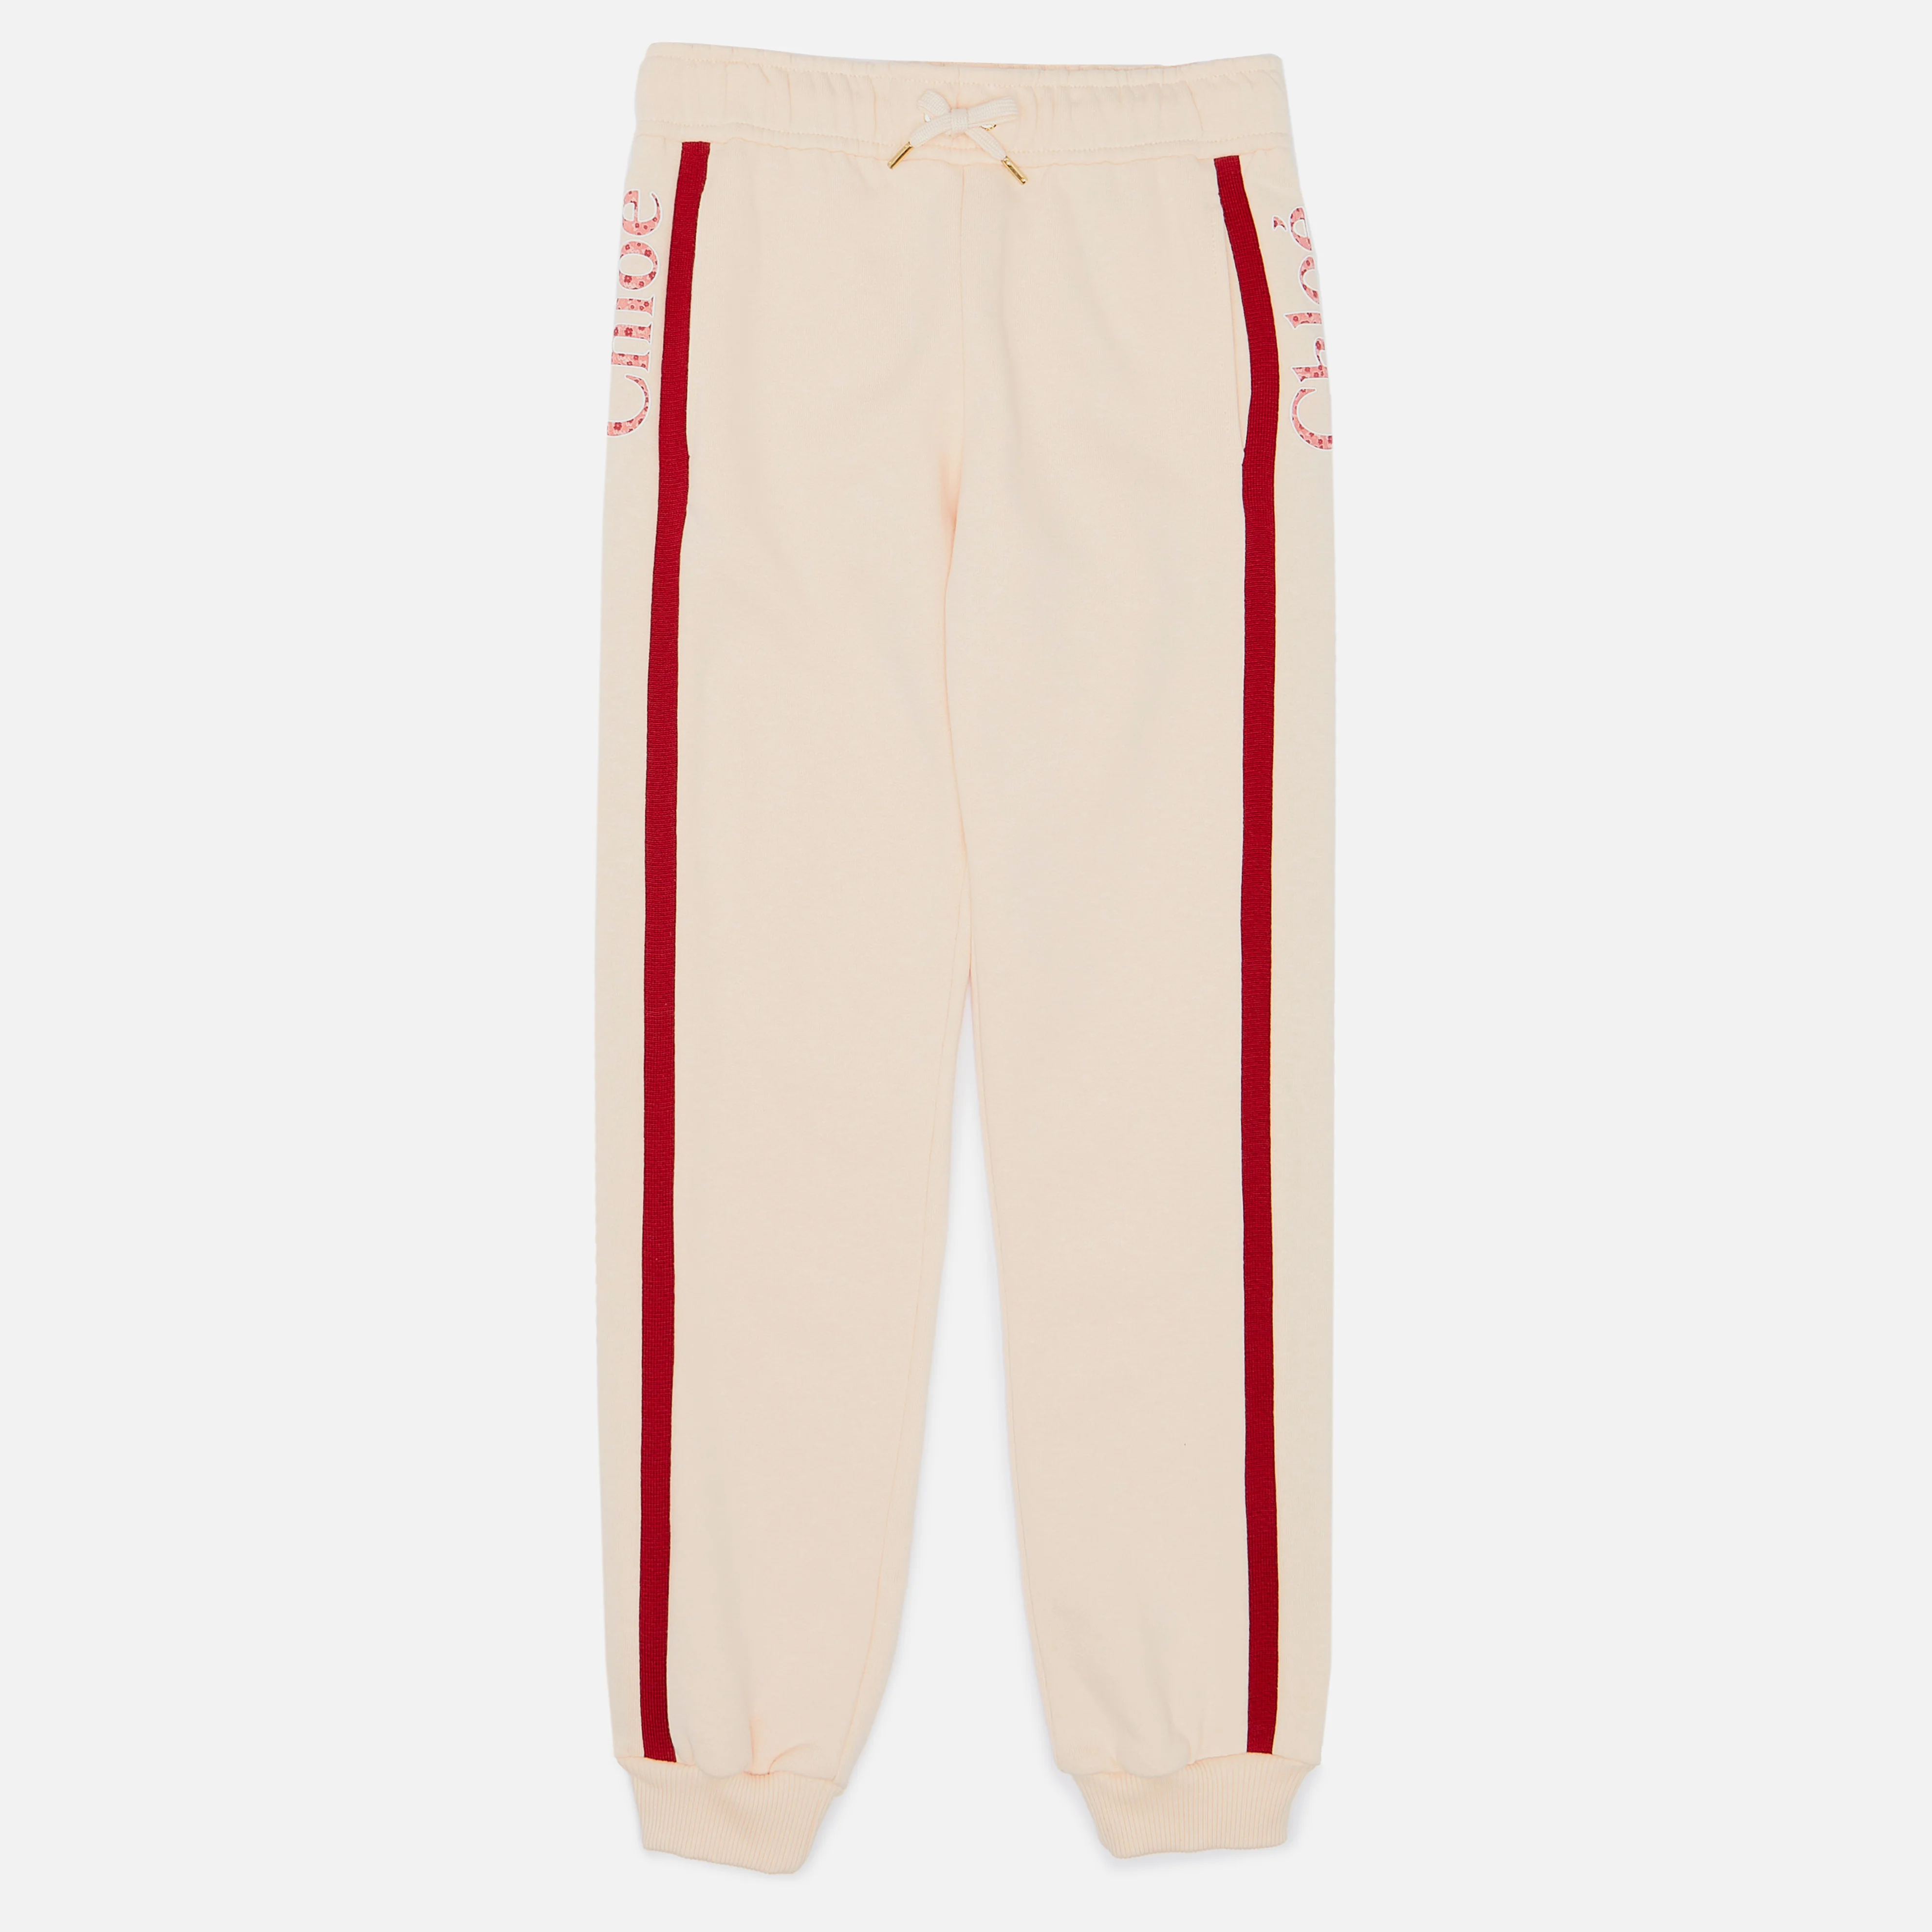 Chloé Girls' Trousers - Pale Pink Image 1